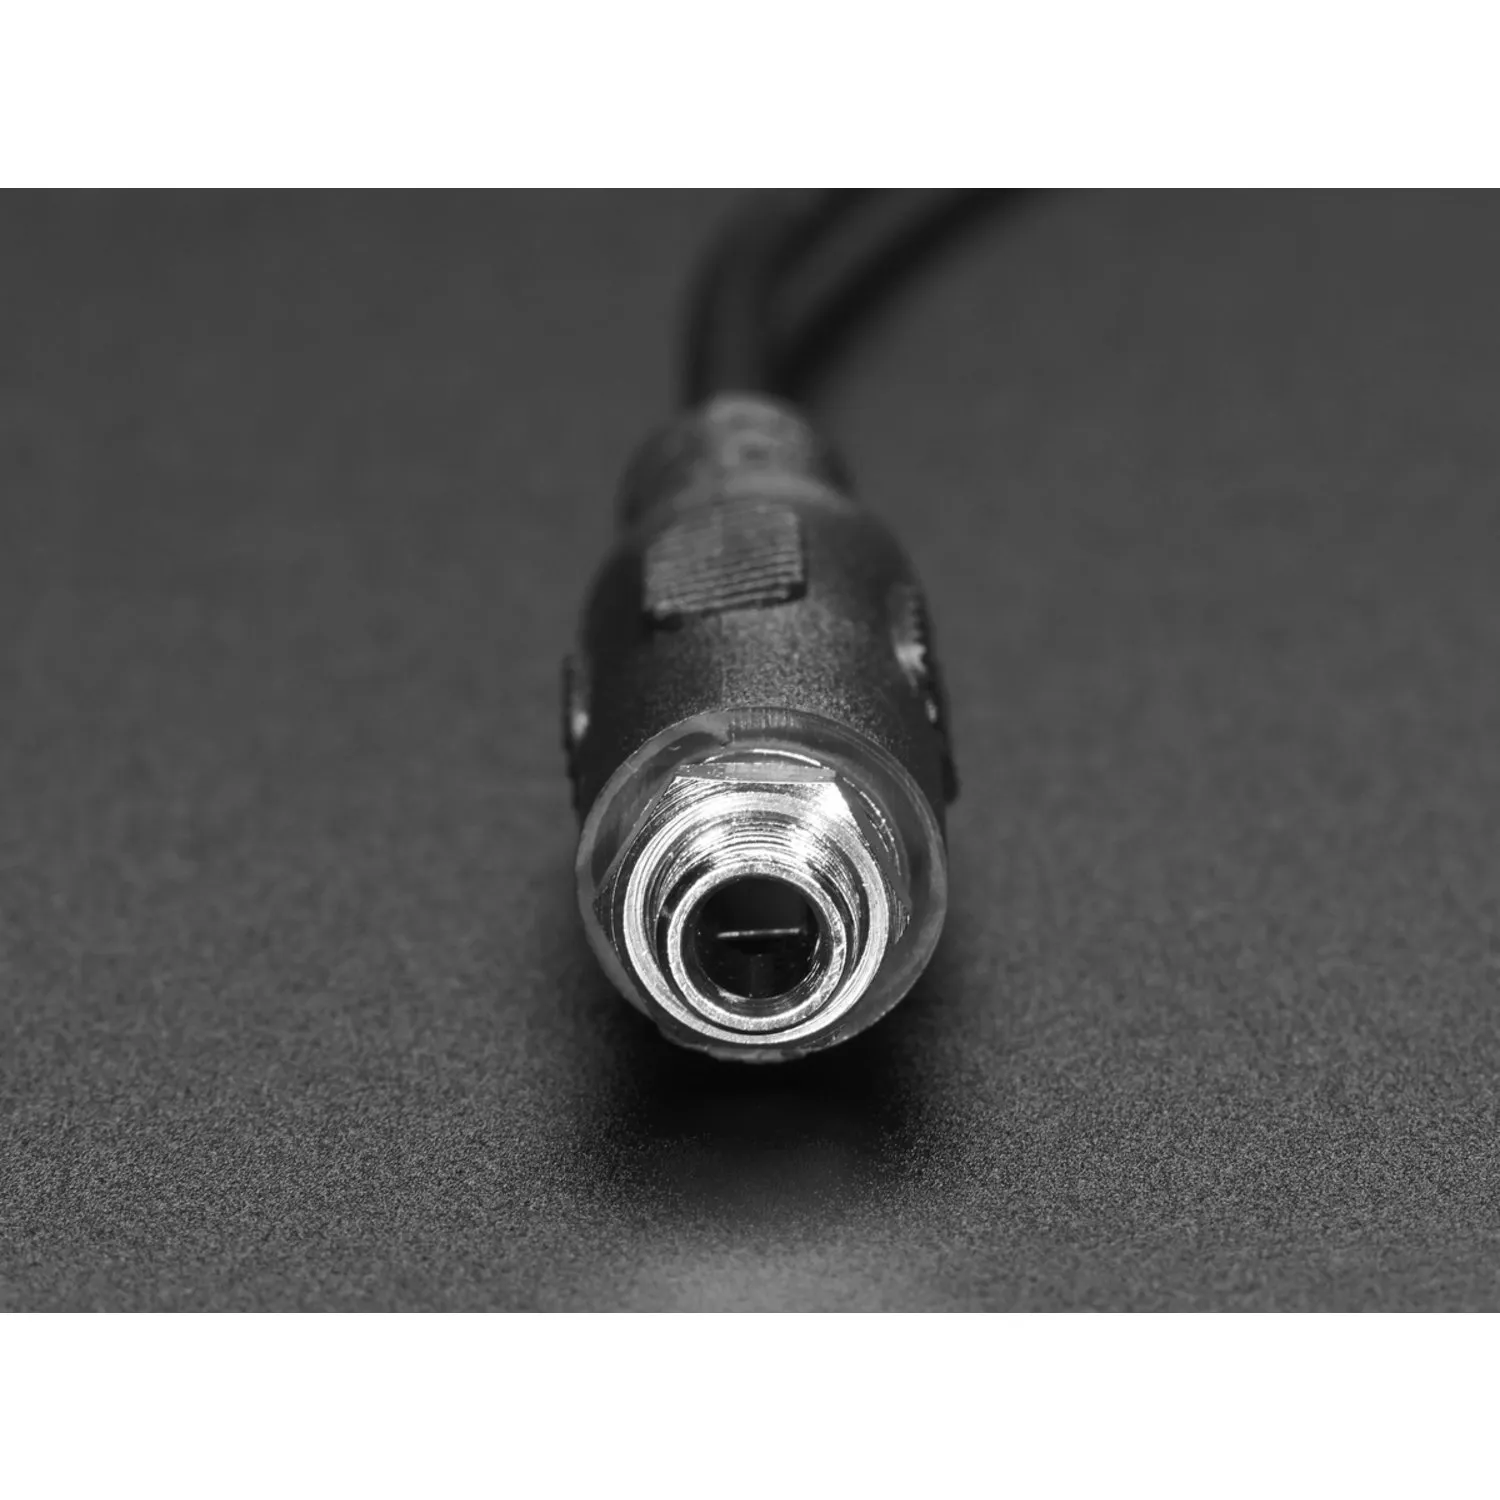 Photo of Panel Mount Stereo Audio Extension Cable - 1/8 / 3.5mm